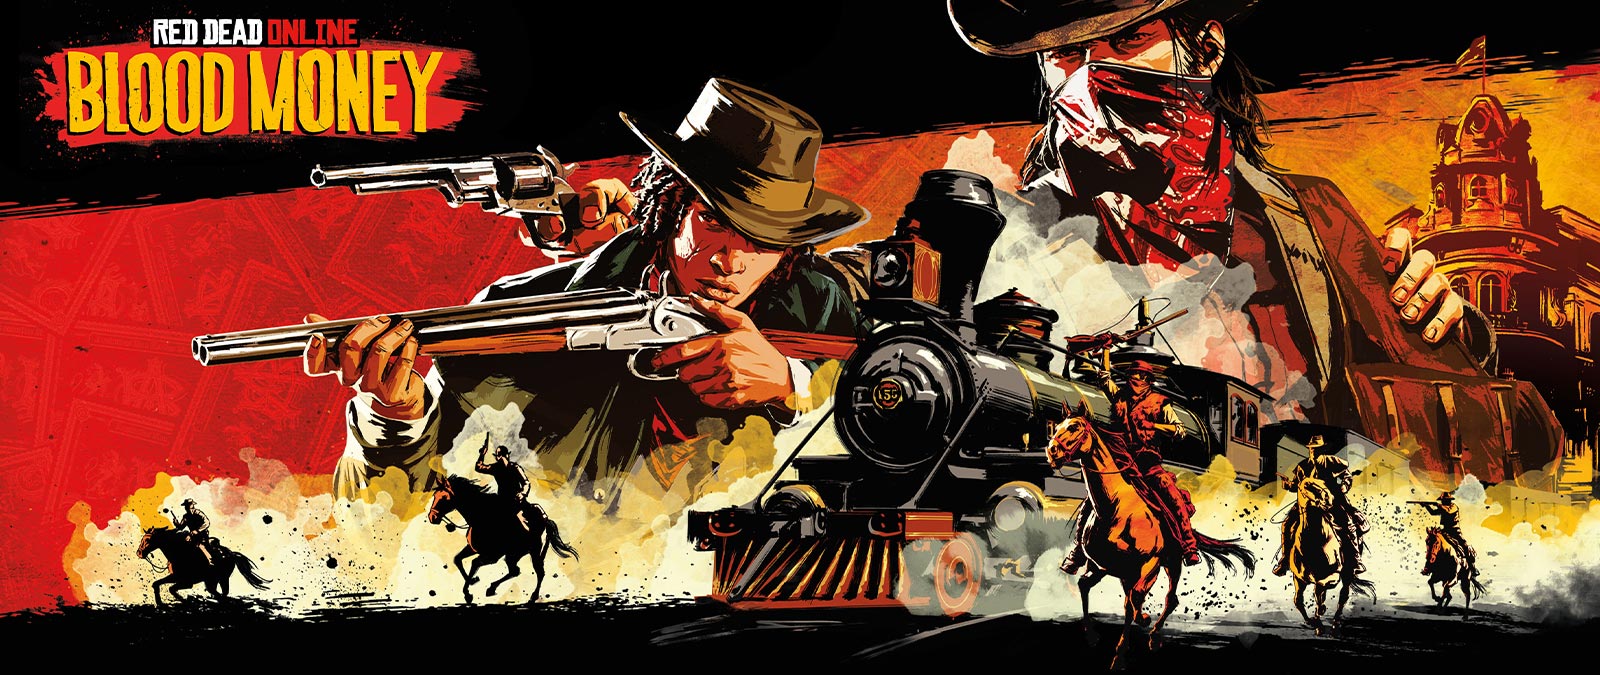 Red Dead Redemption 2 |